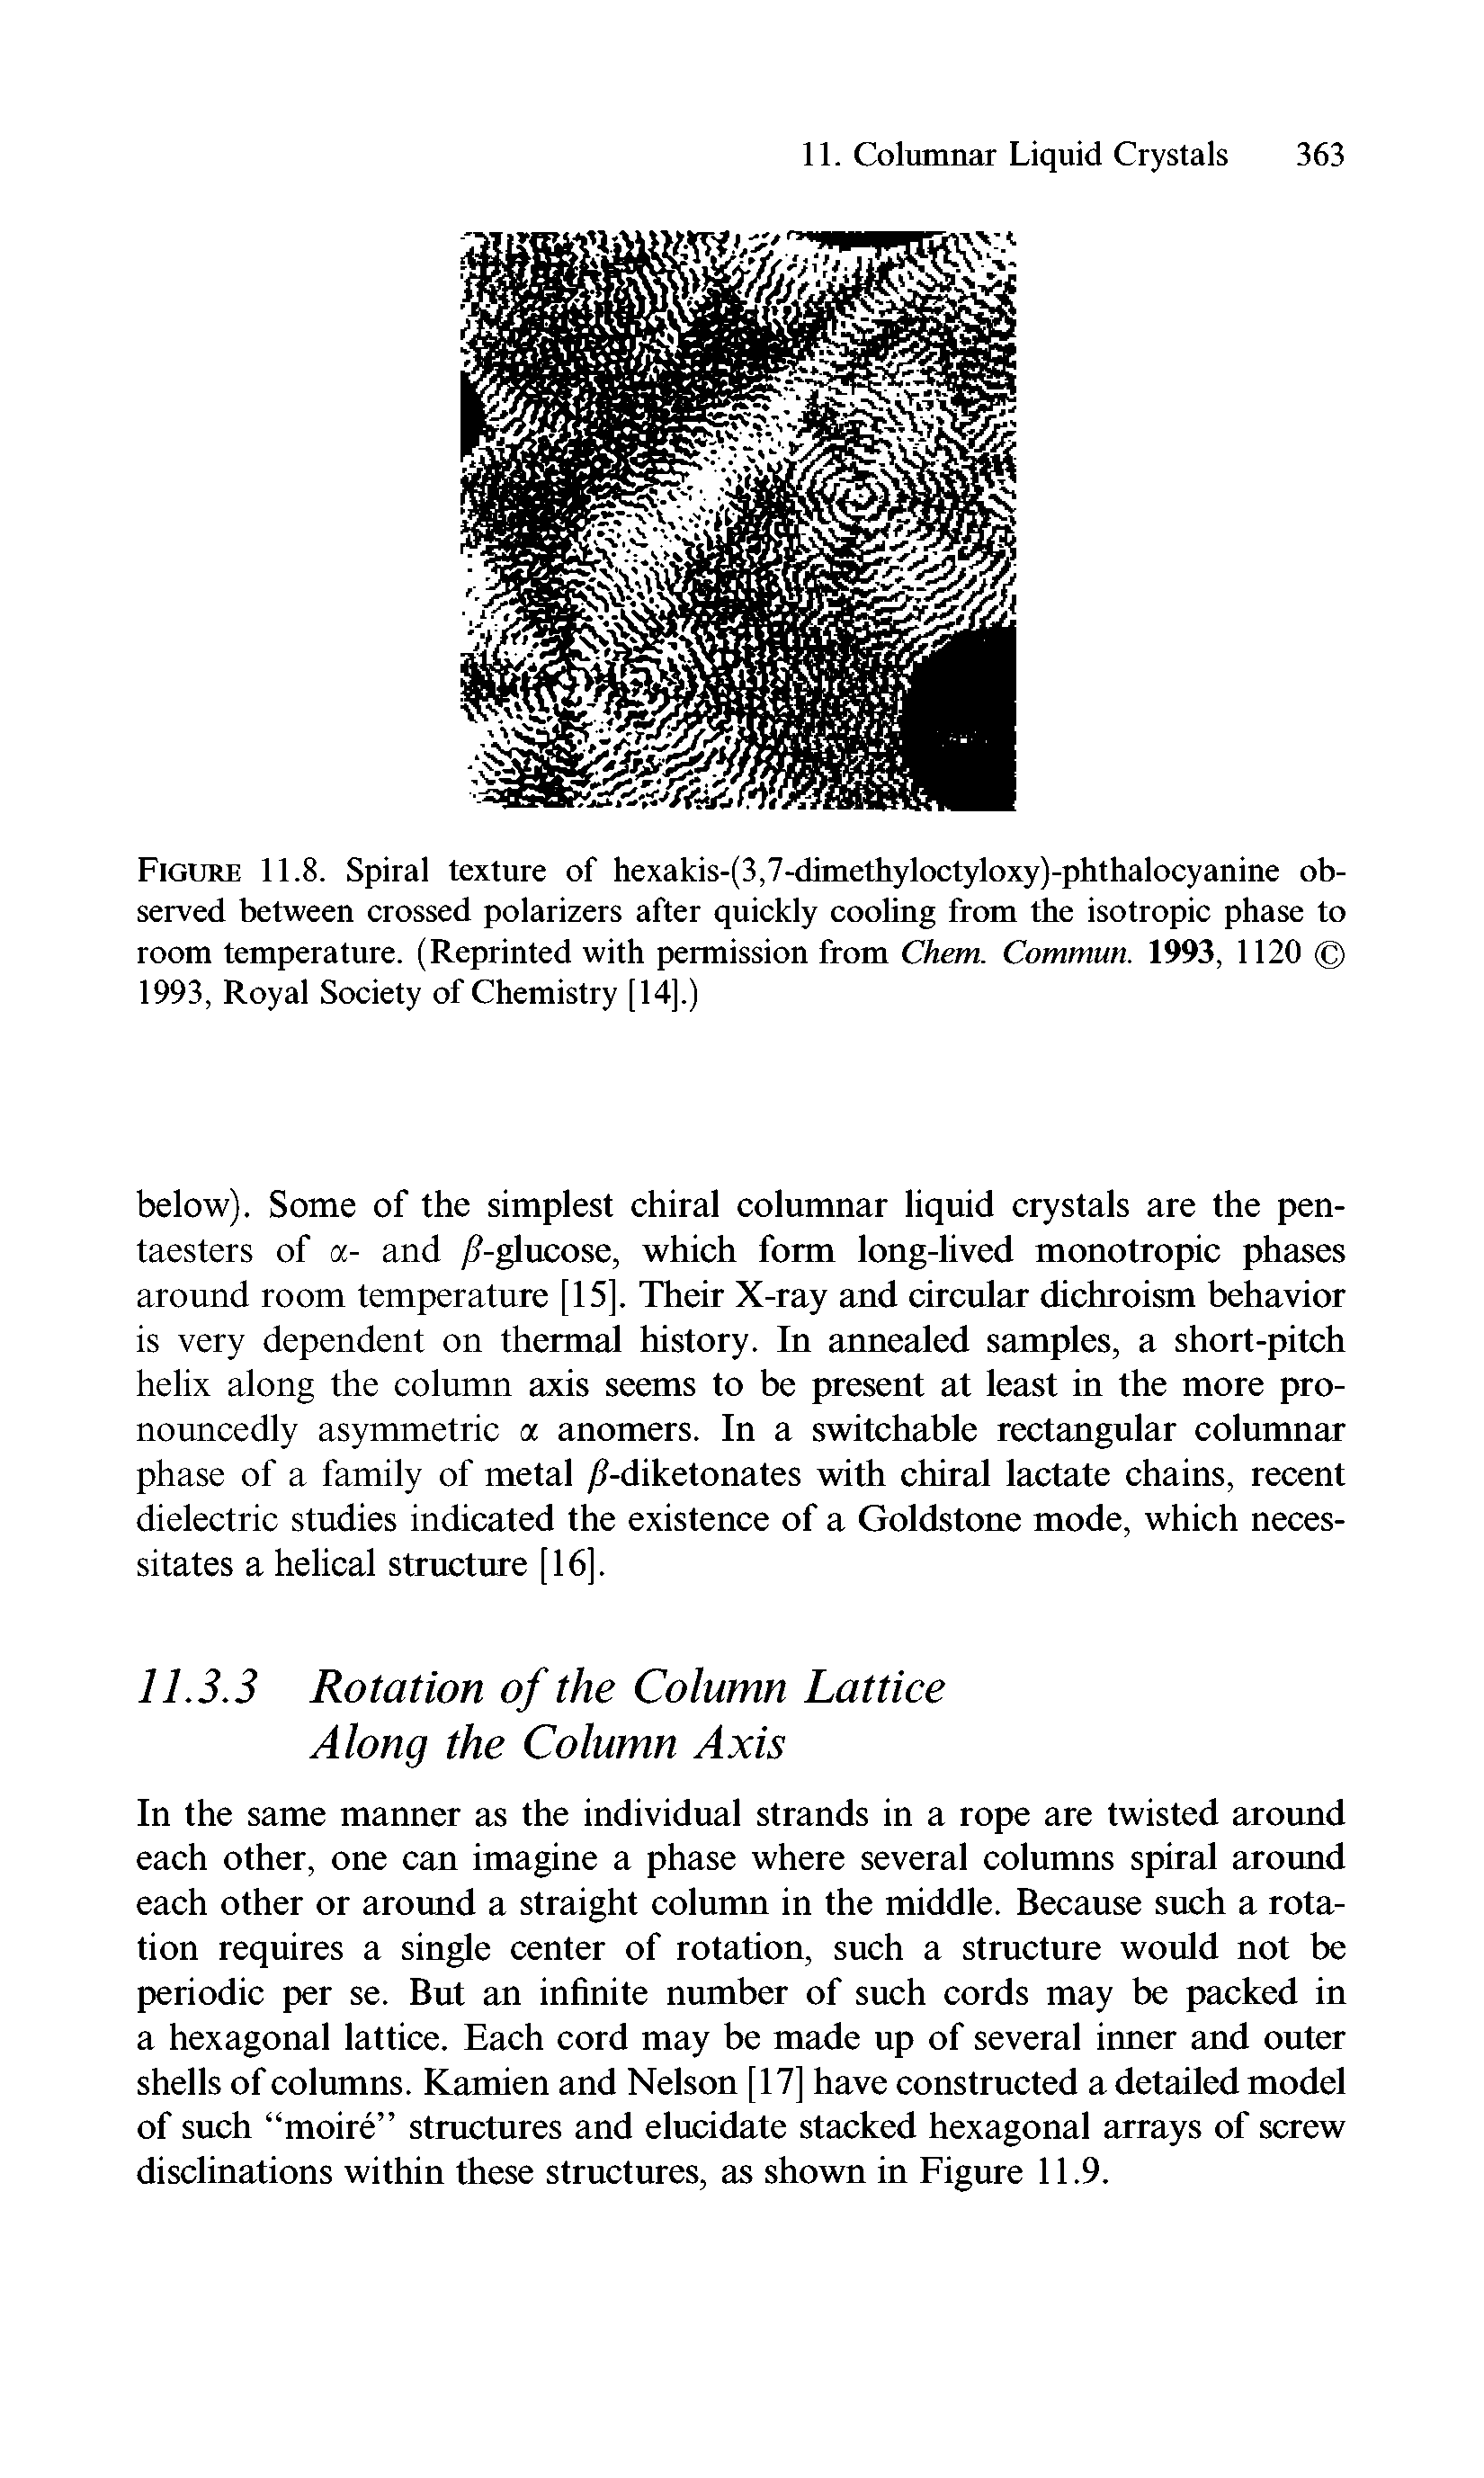 Figure 11.8. Spiral texture of hexakis-(3,7-dimethyloctyloxy)-phthalocyanine observed between crossed polarizers after quickly cooling from the isotropic phase to room temperature. (Reprinted with permission from Chem. Commun. 1993, 1120 1993, Royal Society of Chemistry [14].)...